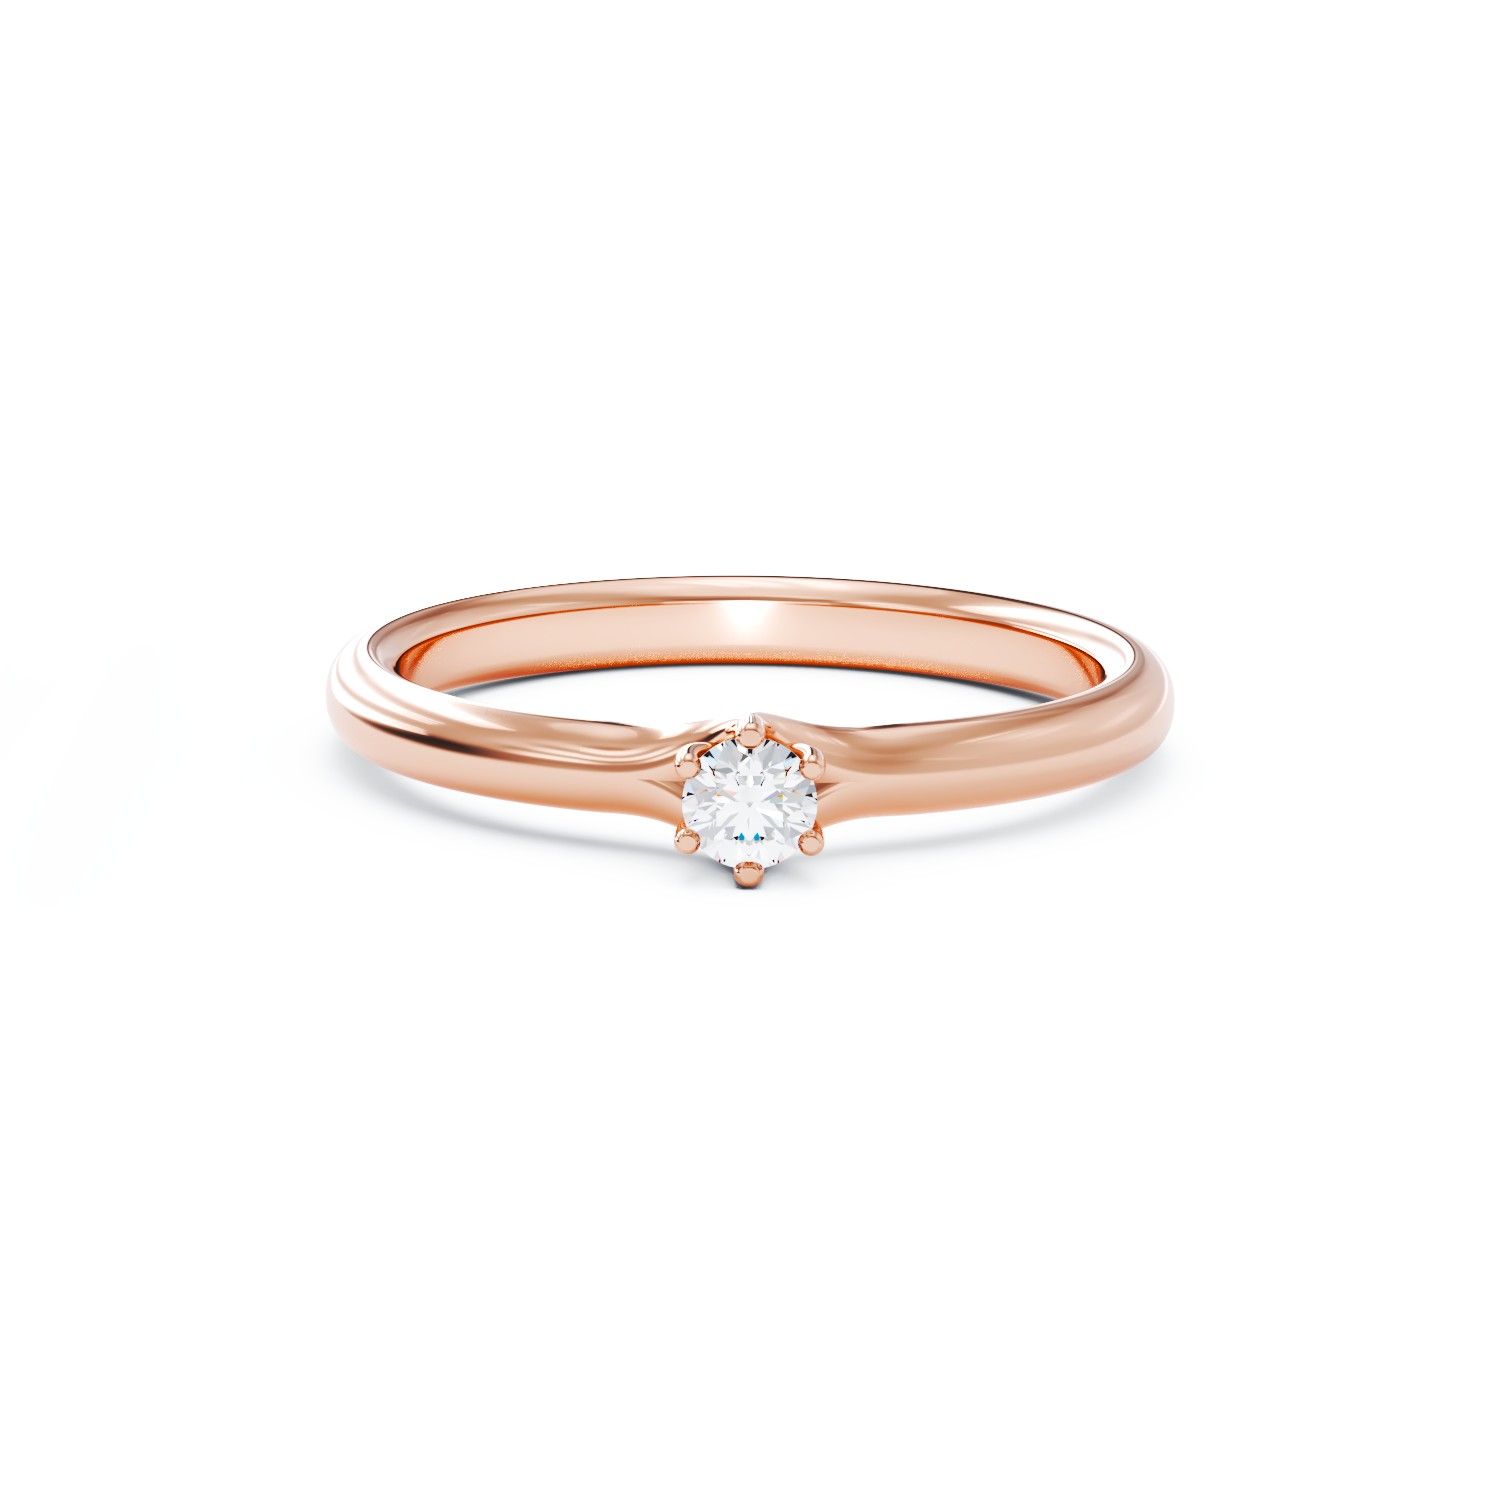 18K rose gold engagement ring with 0.11ct solitaire diamond